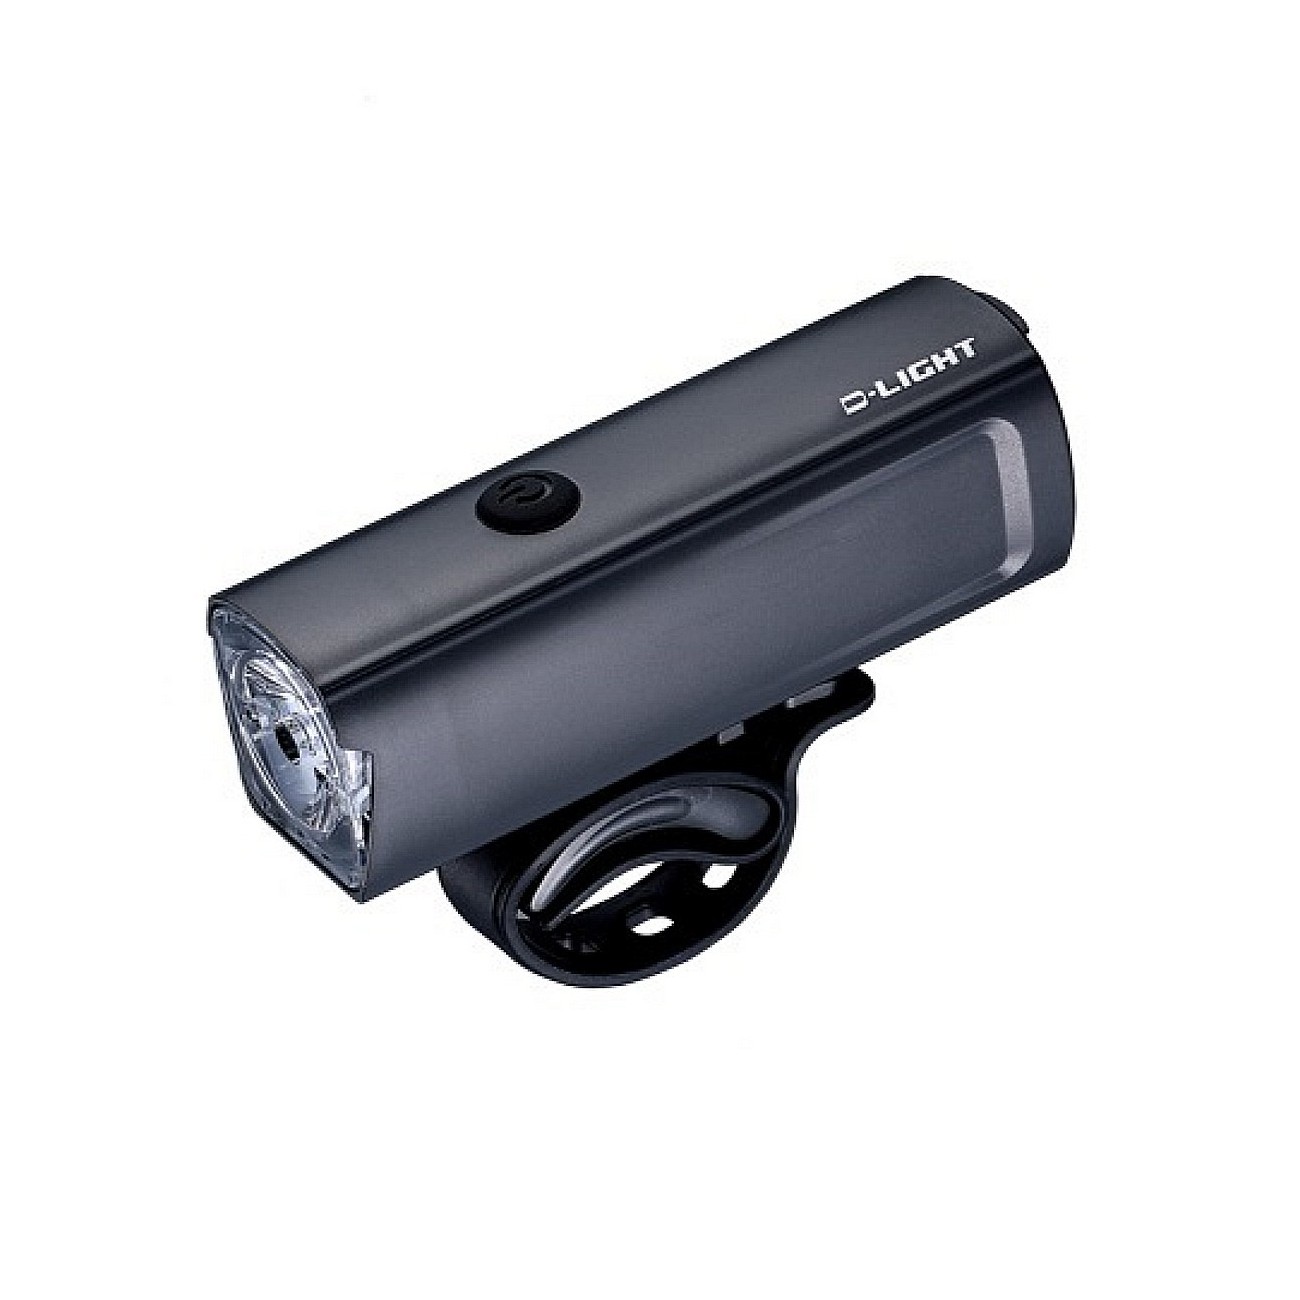 LAMPE FRONTALE RECHARGEABLE USB CG-130P 400 LUMENS - 1